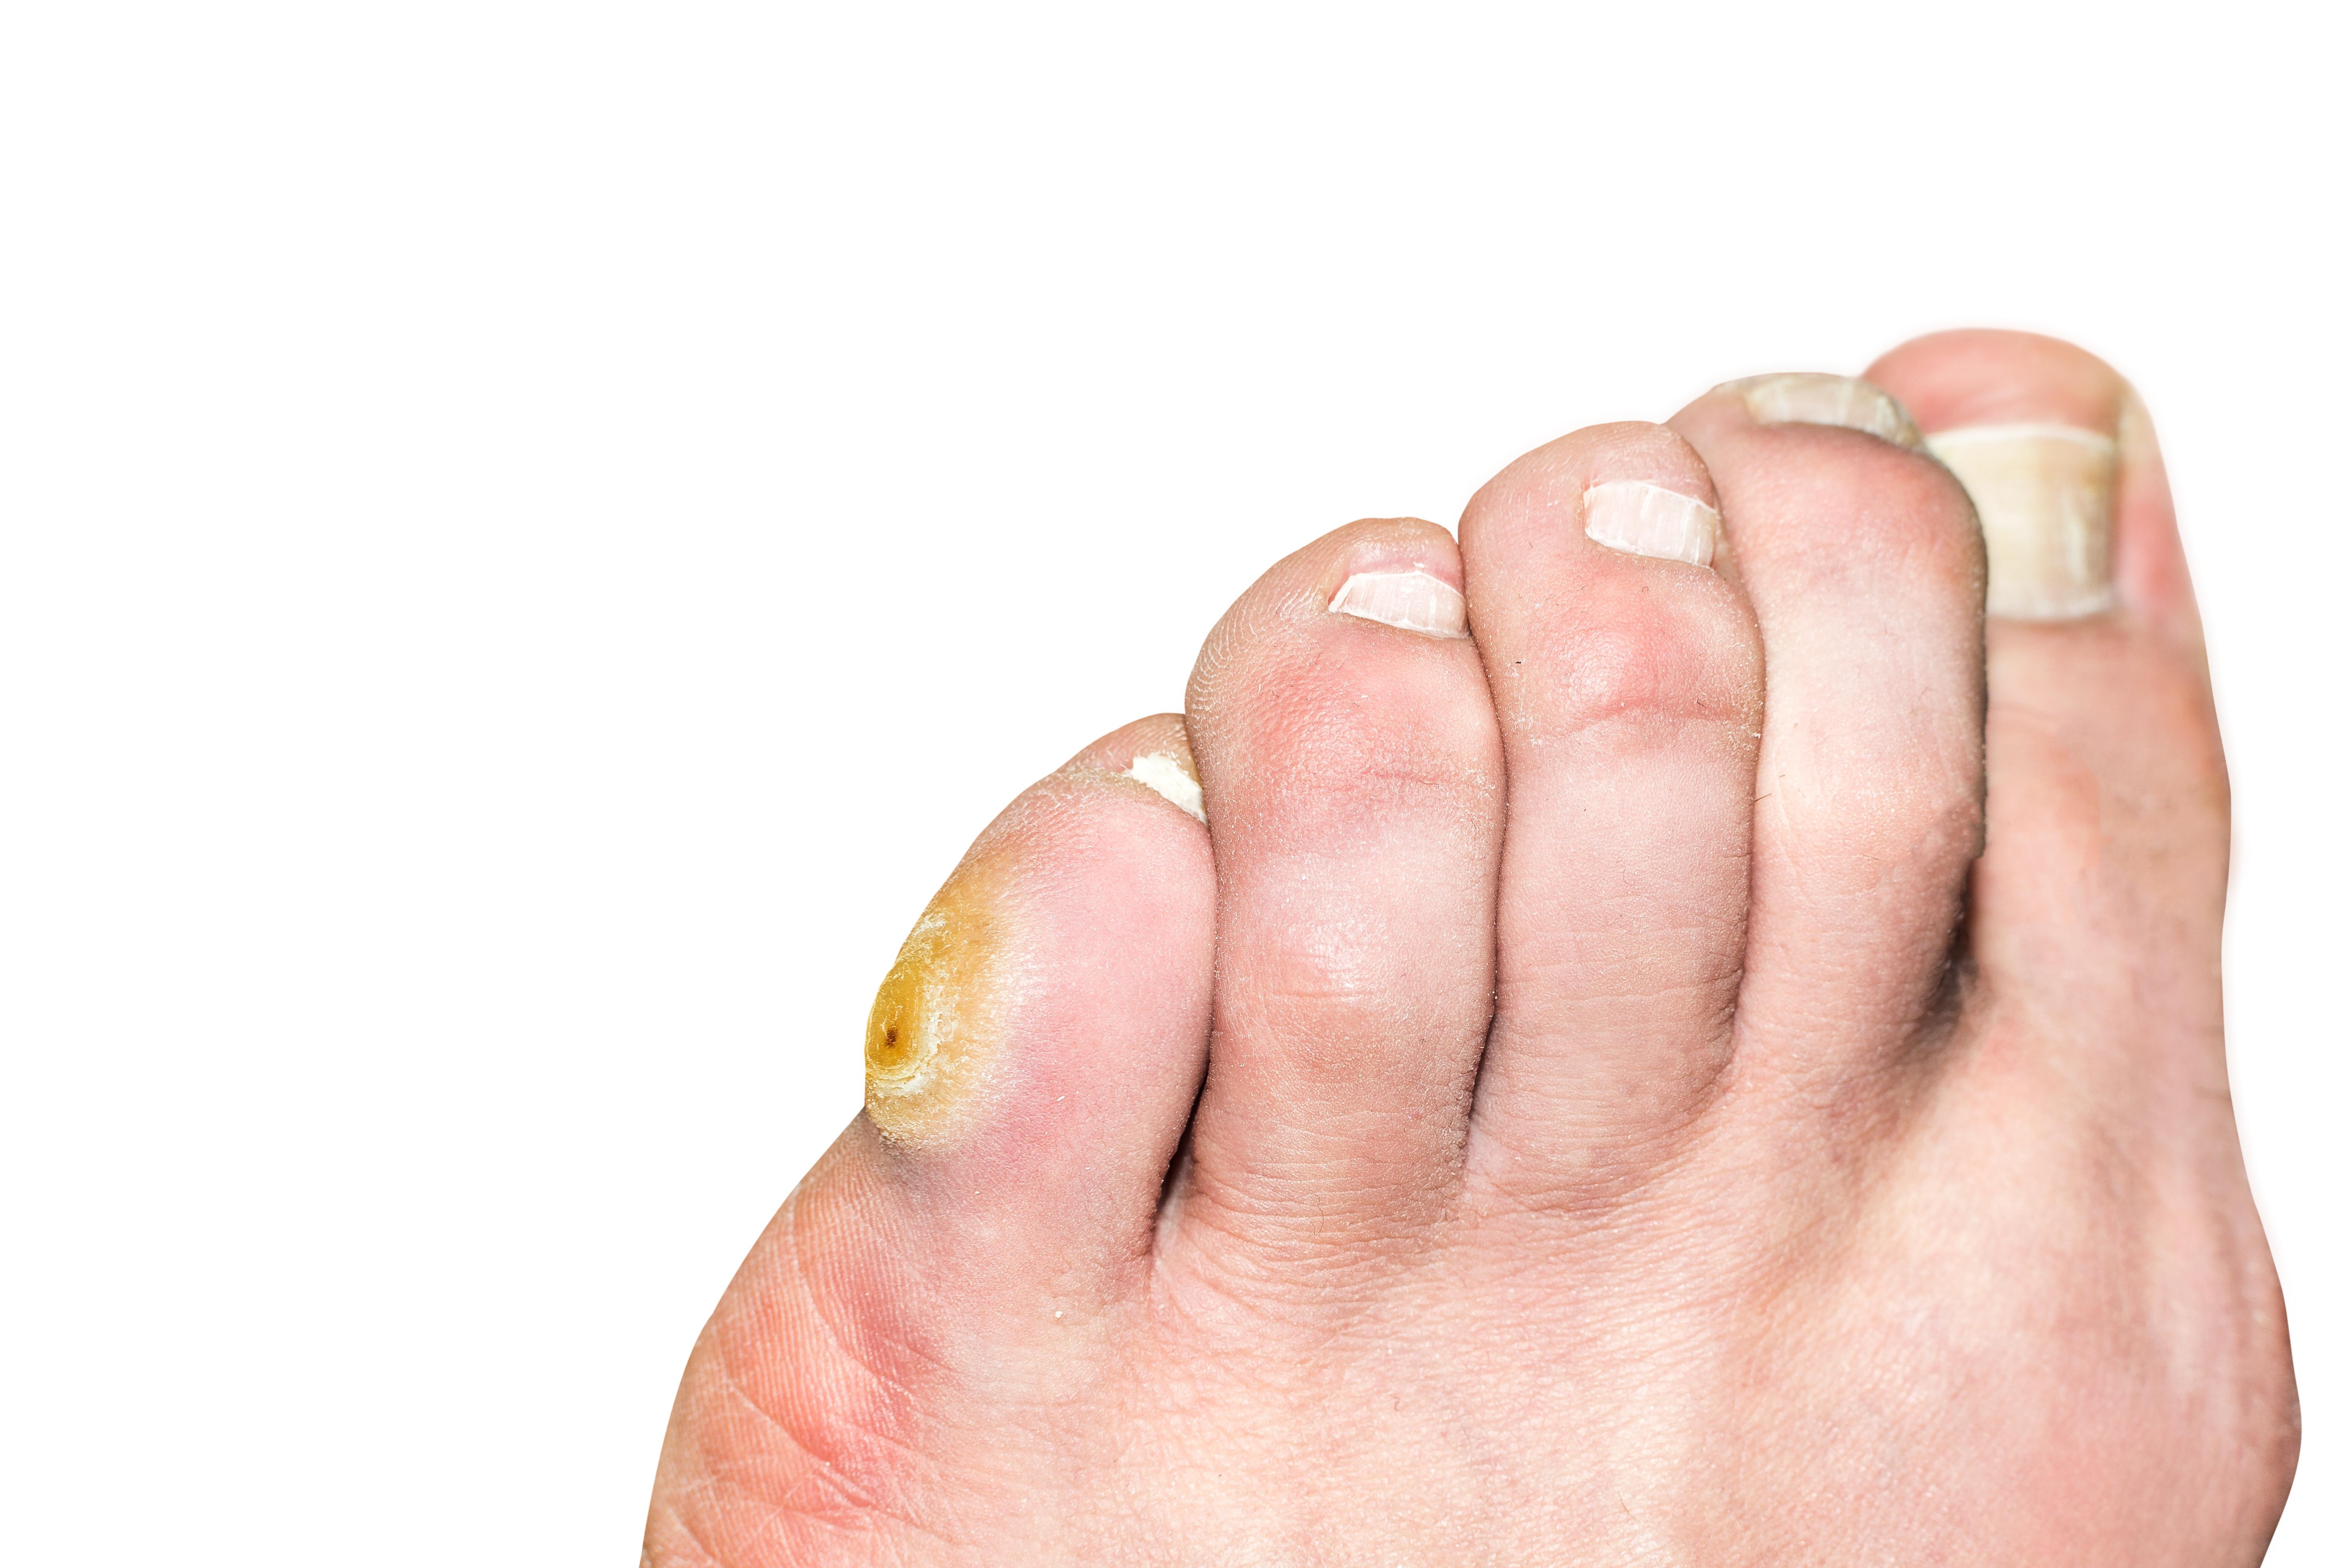 How to get rid of corns on the foot?